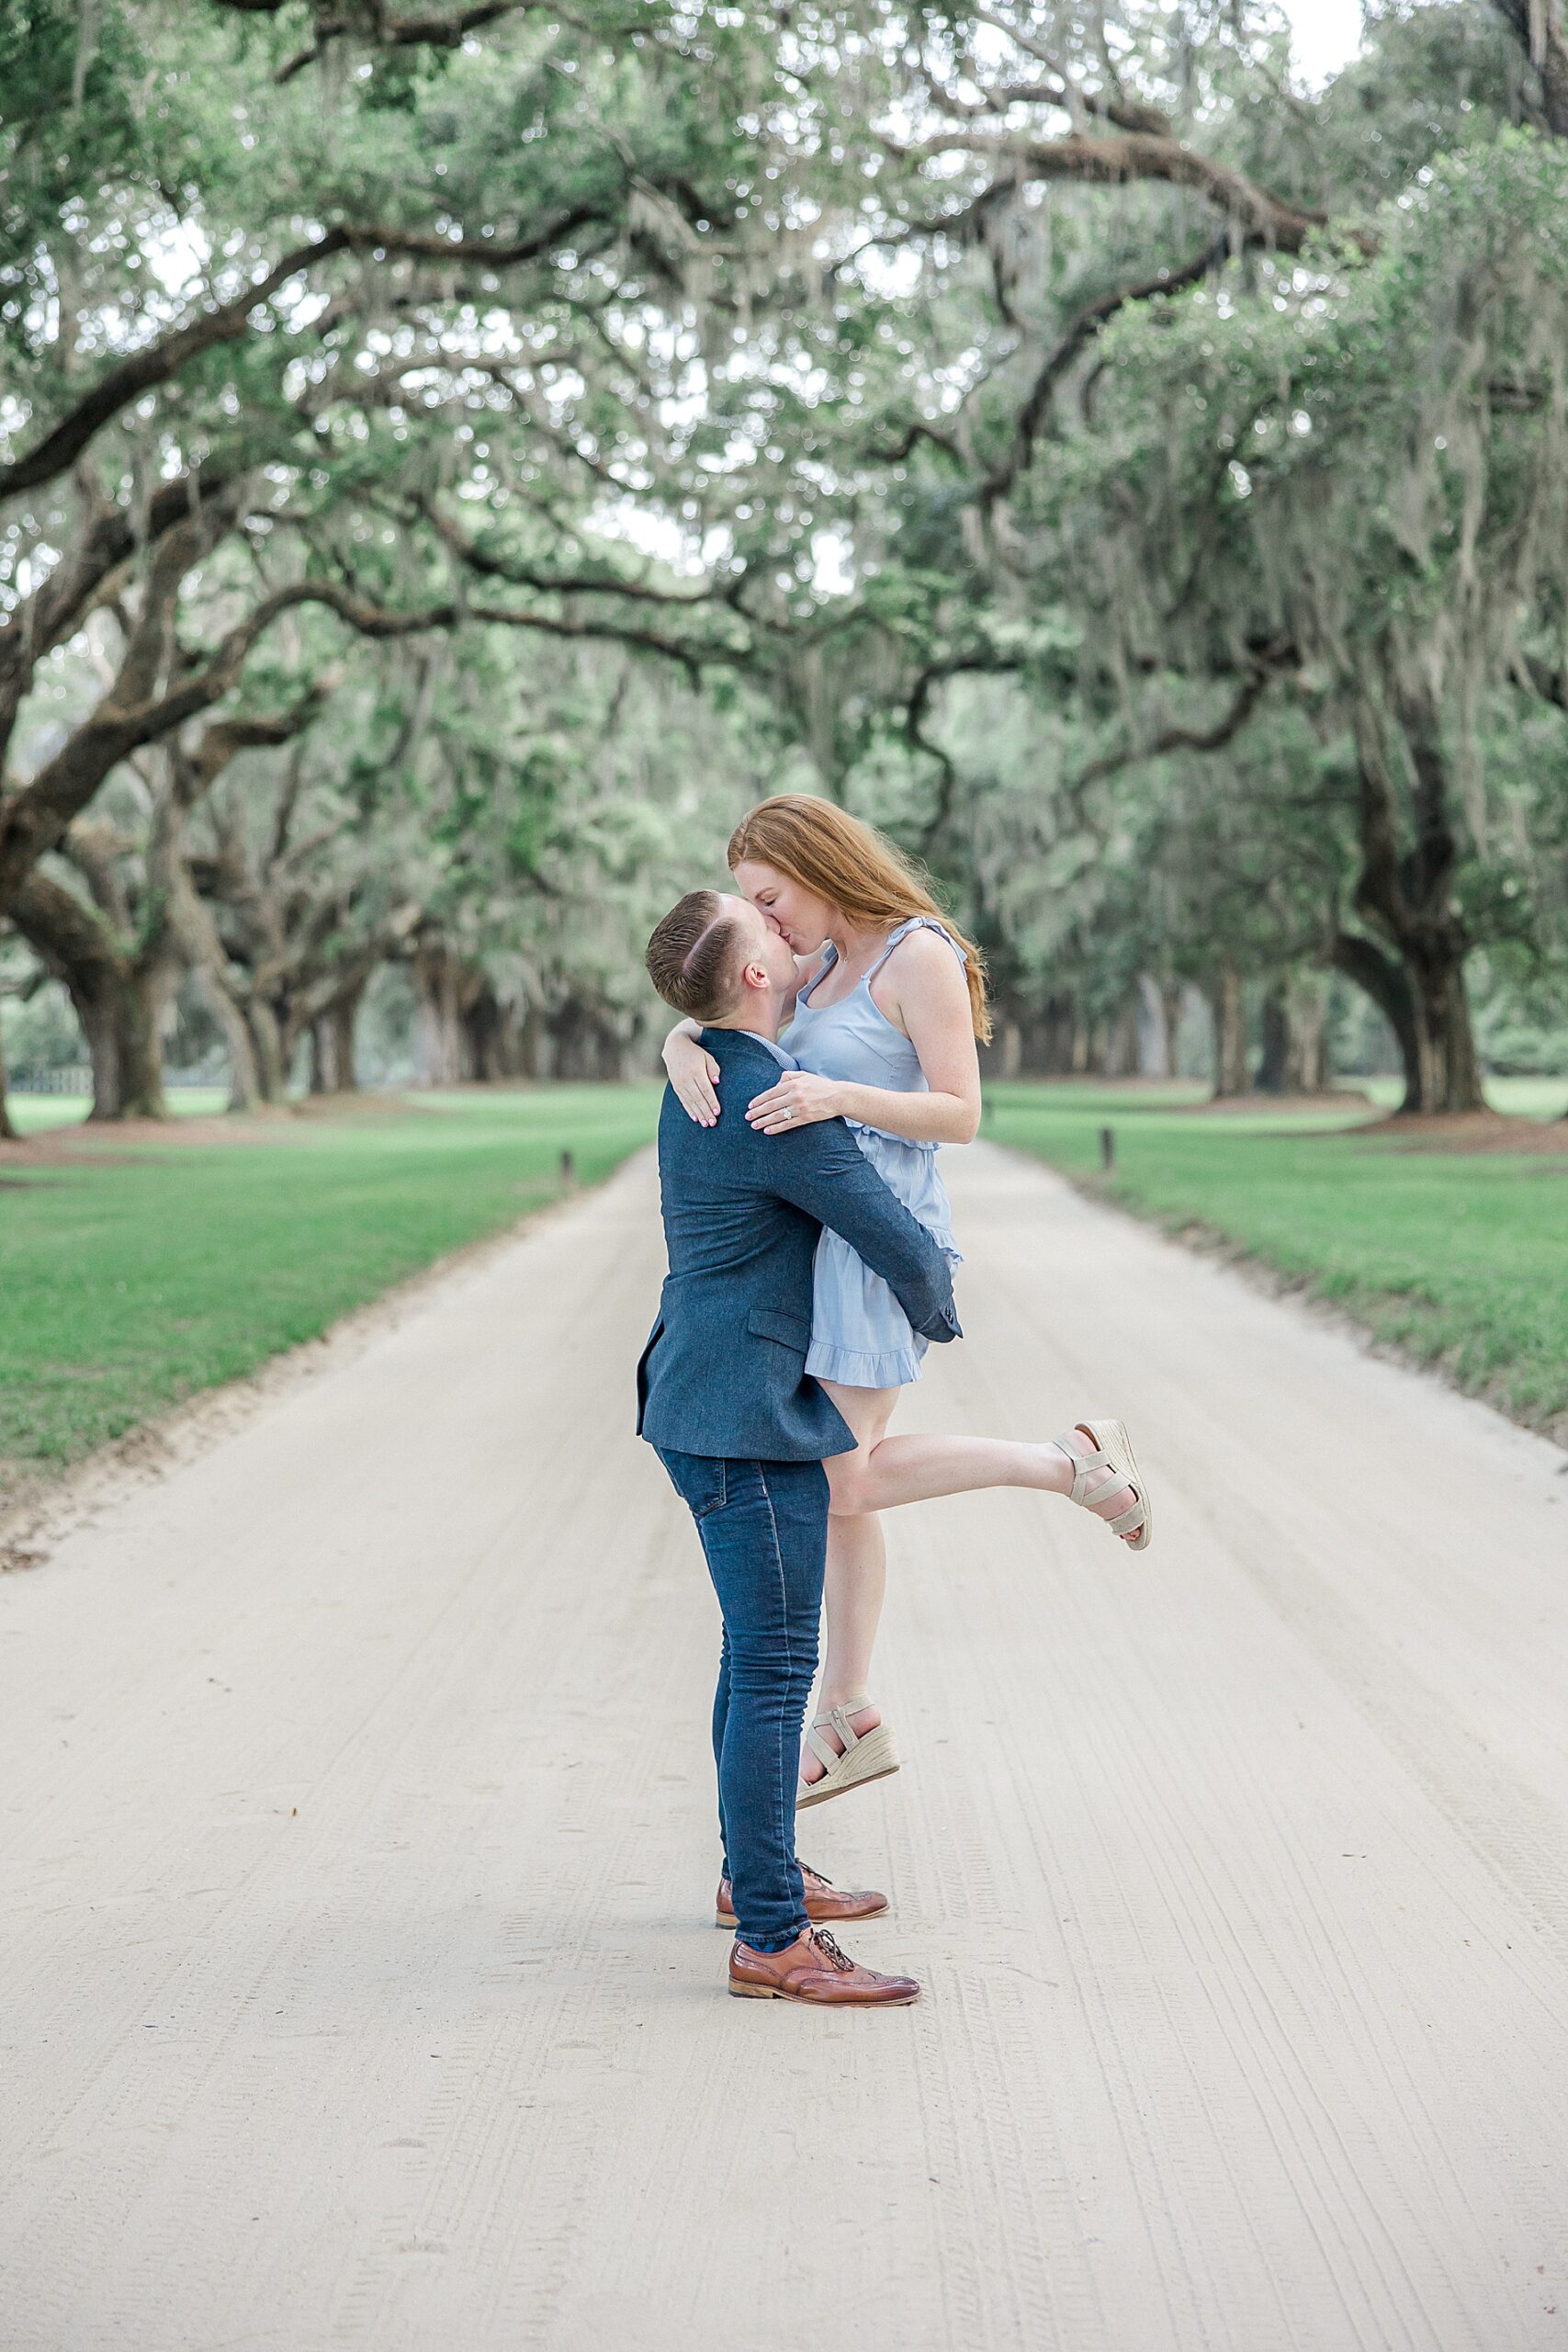 timeless engagement portraits by Charleston photographer, Karen Schanely Photography